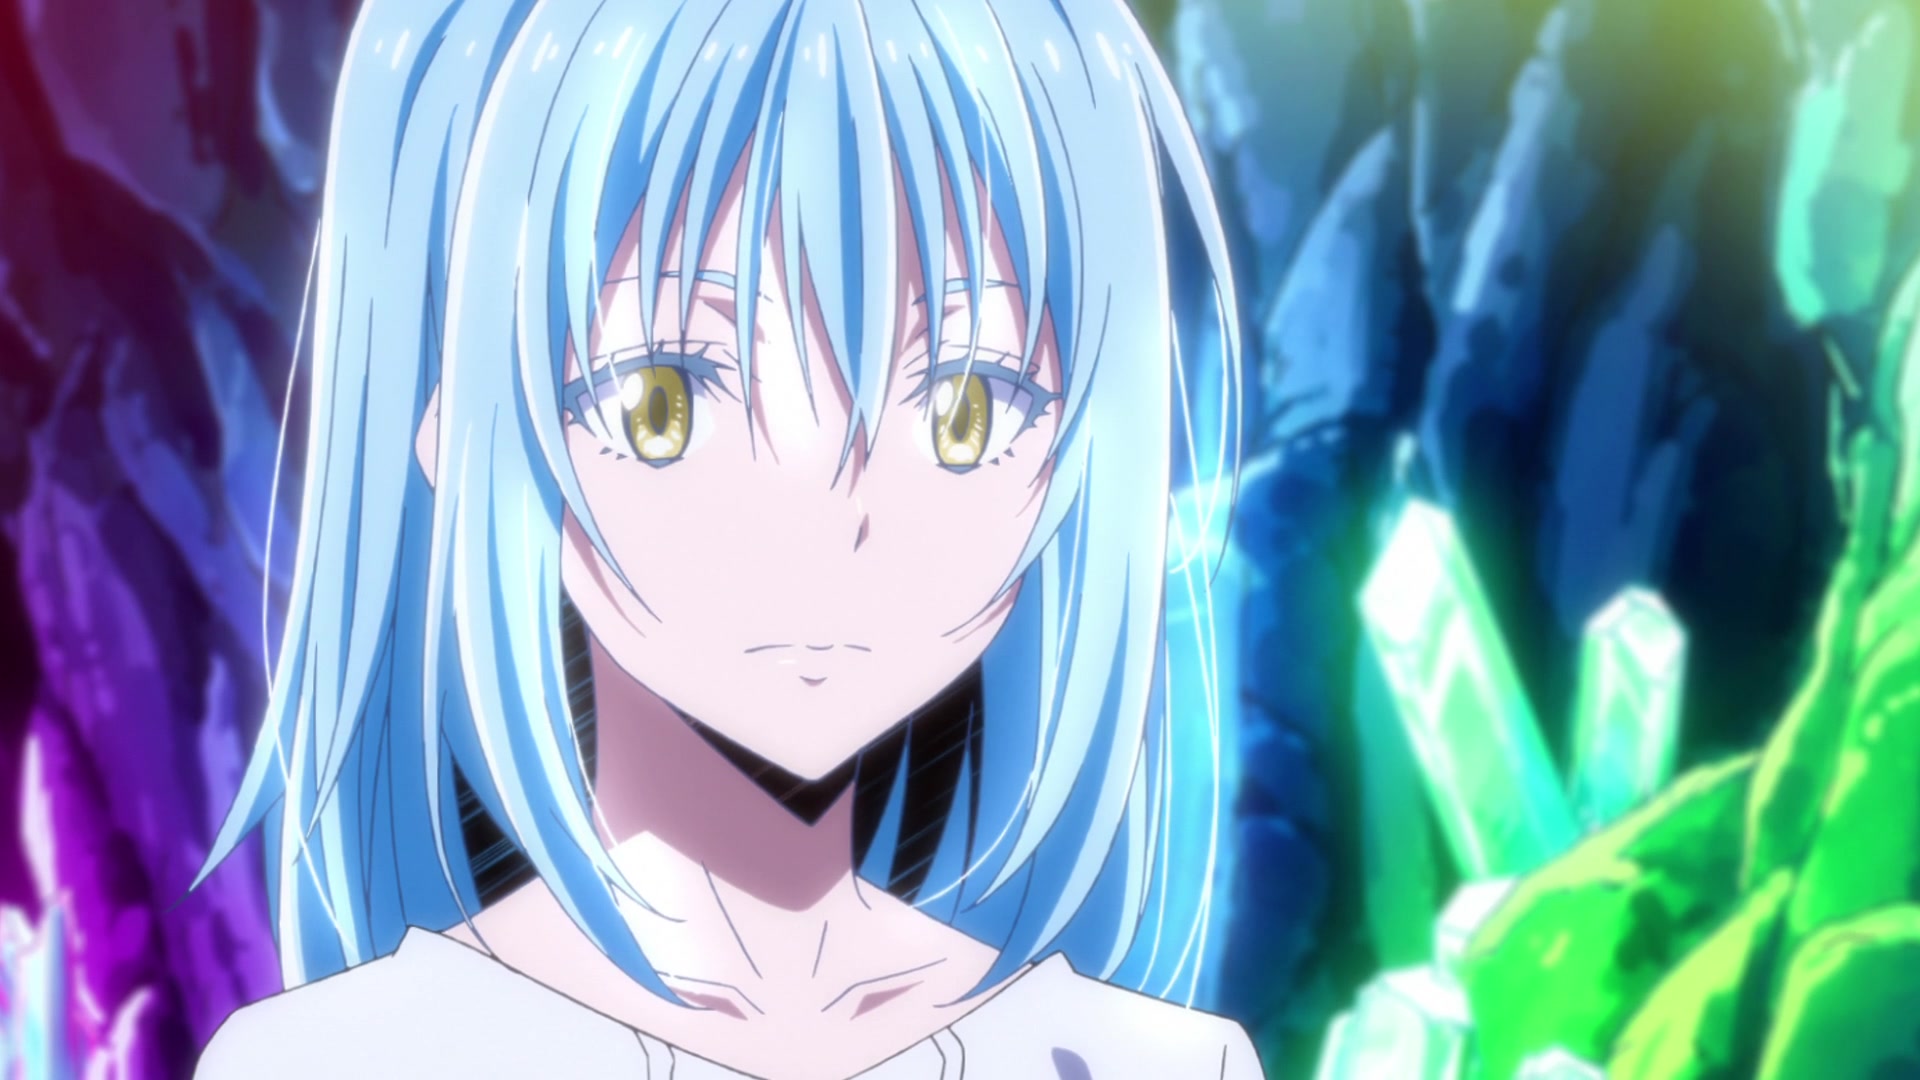 Is That Time I Got Reincarnated as a Slime Season 2 Part 2 on Crunchyroll,  Netflix, Hulu, or Funimation in English Sub or Dub? Where to Watch and  Stream the Latest Episodes